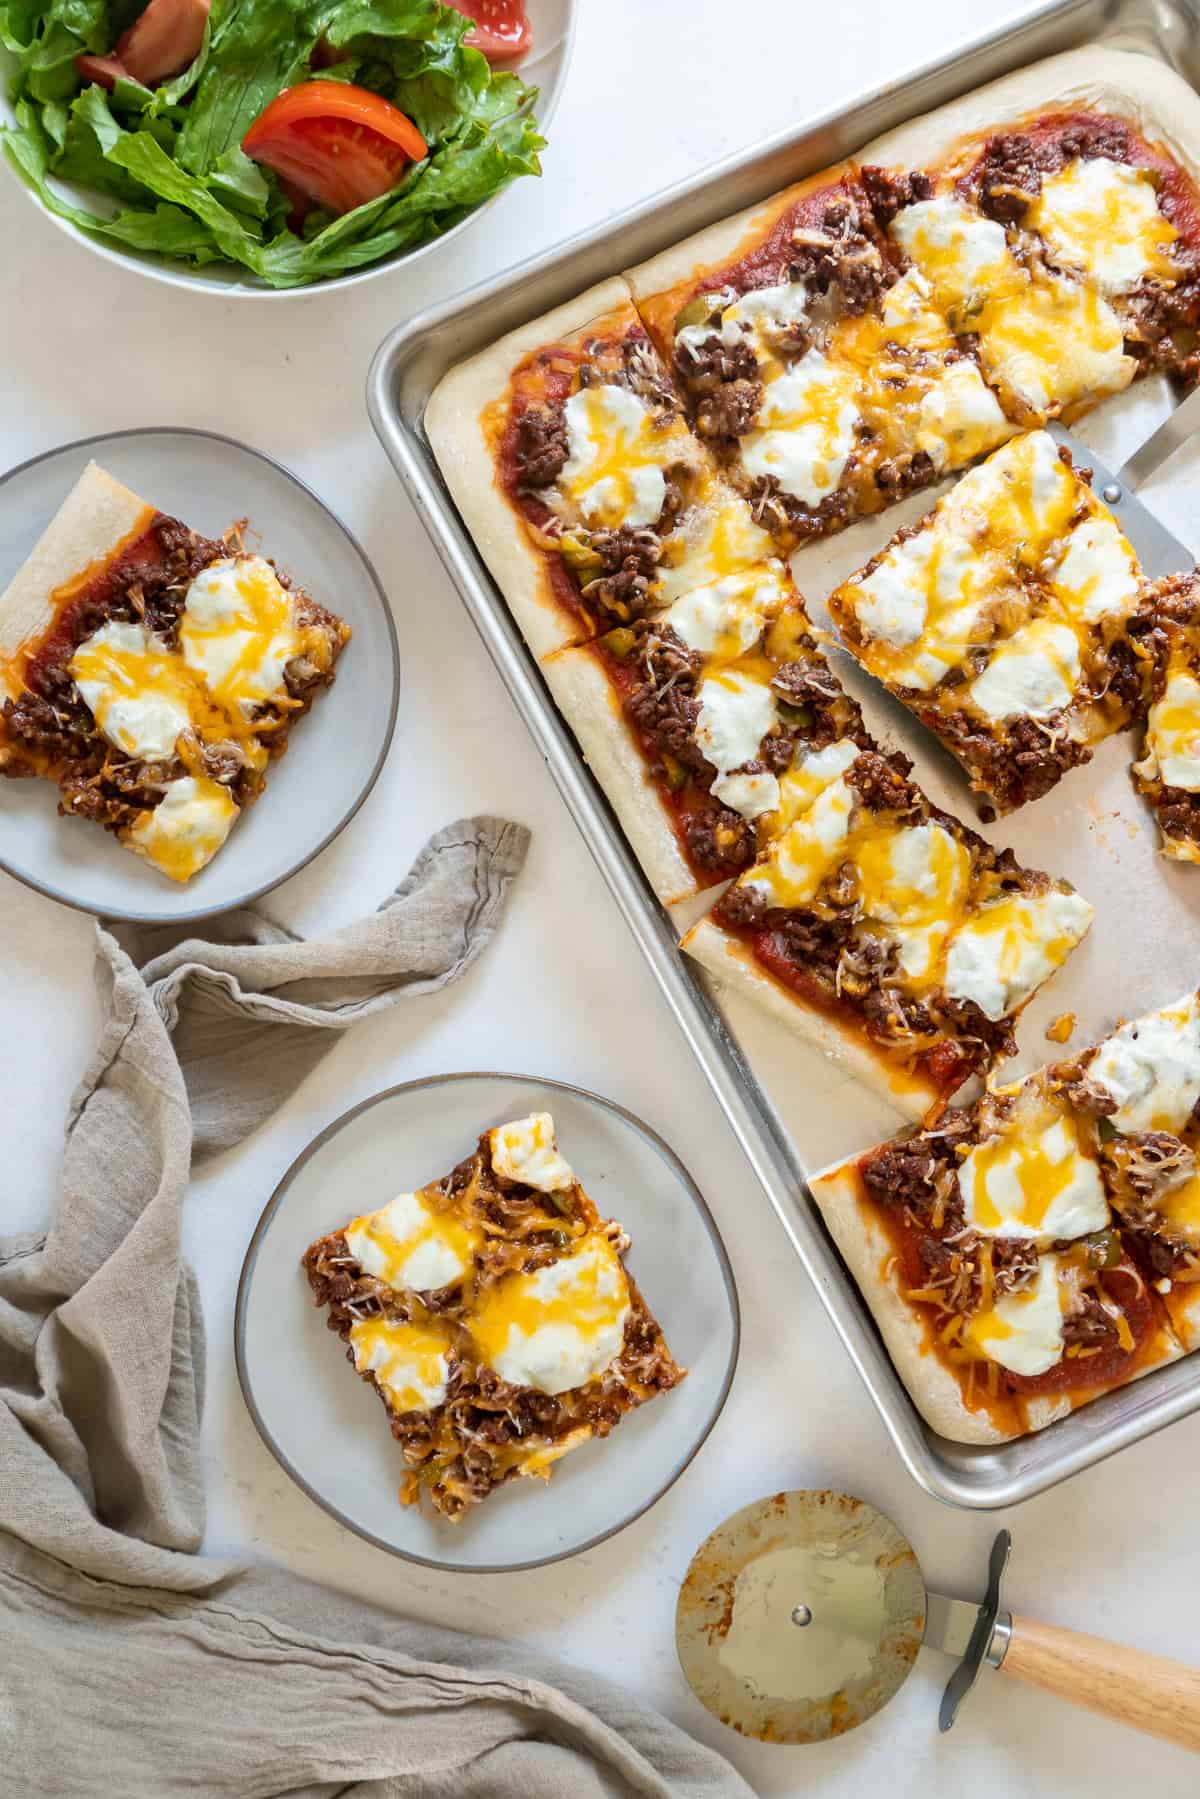 Two plates with slices of pizza and a green salad next to a cheeseburger pizza on a baking sheet.